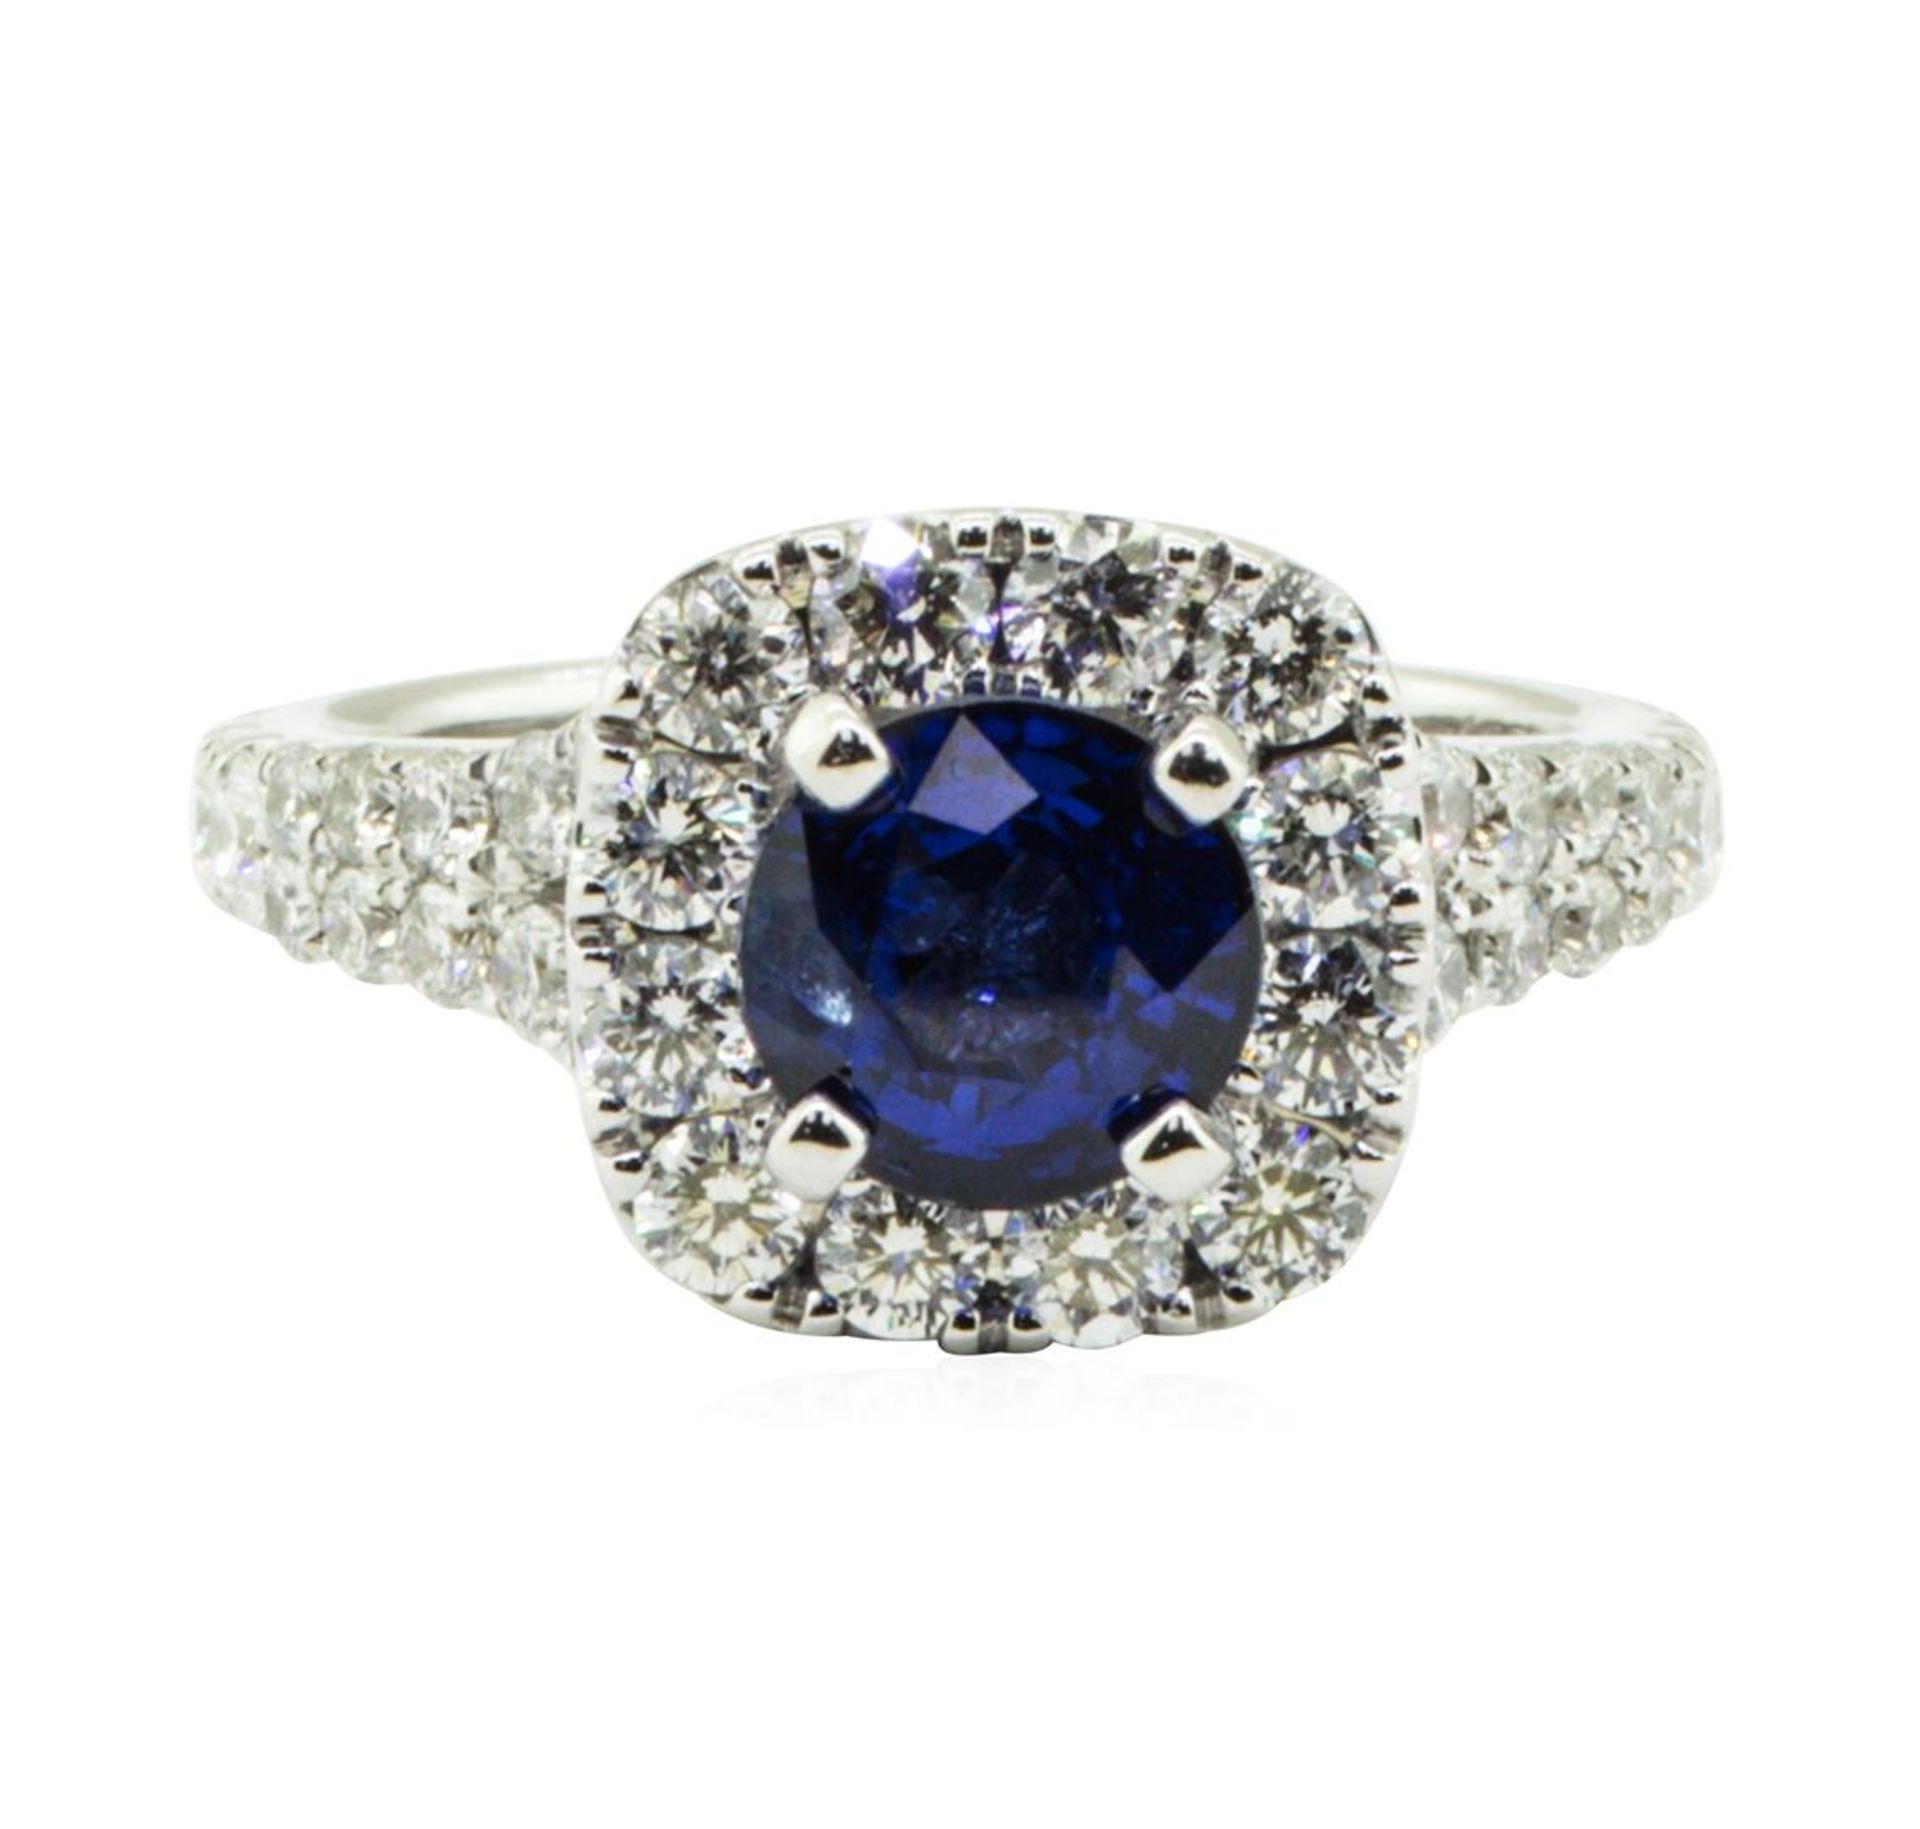 2.47 ctw Round Brilliant Blue Sapphire And Diamond Ring - 14KT White Gold - Image 2 of 5